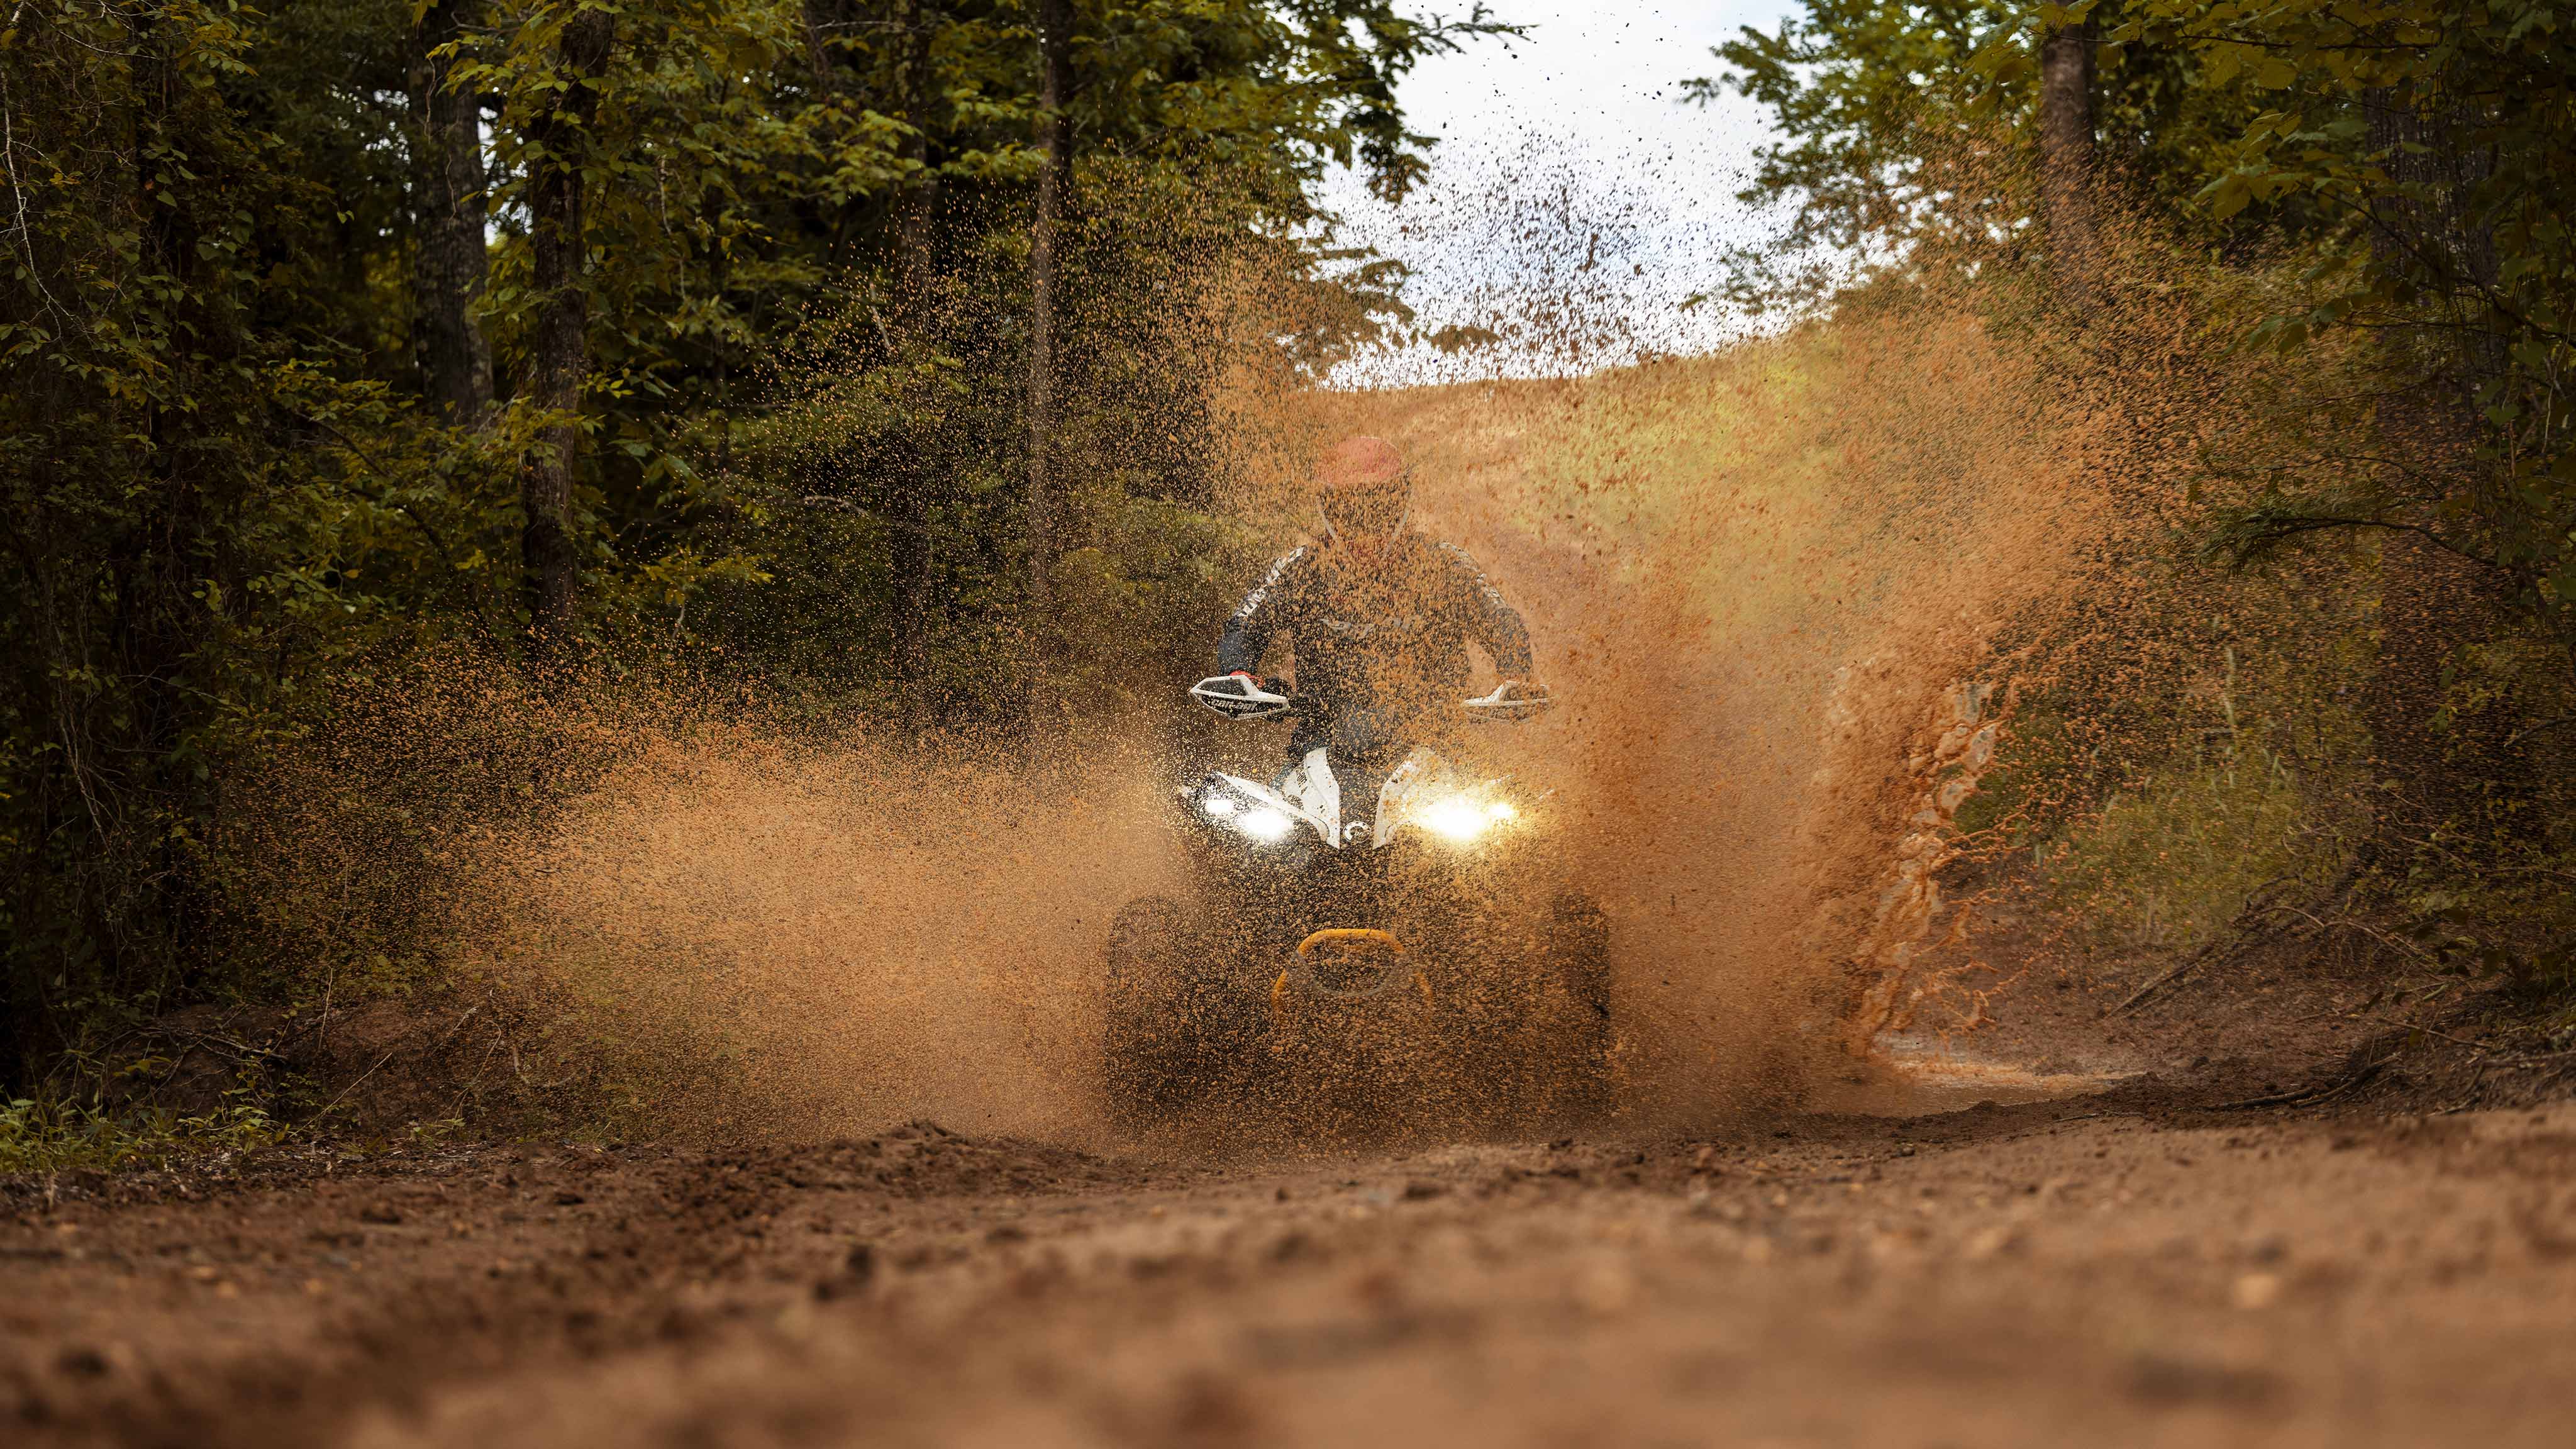 A Catalyst Gray and Neo Yellow Can-Am Renegade X MR 1000 kicking up mud in a mud hole